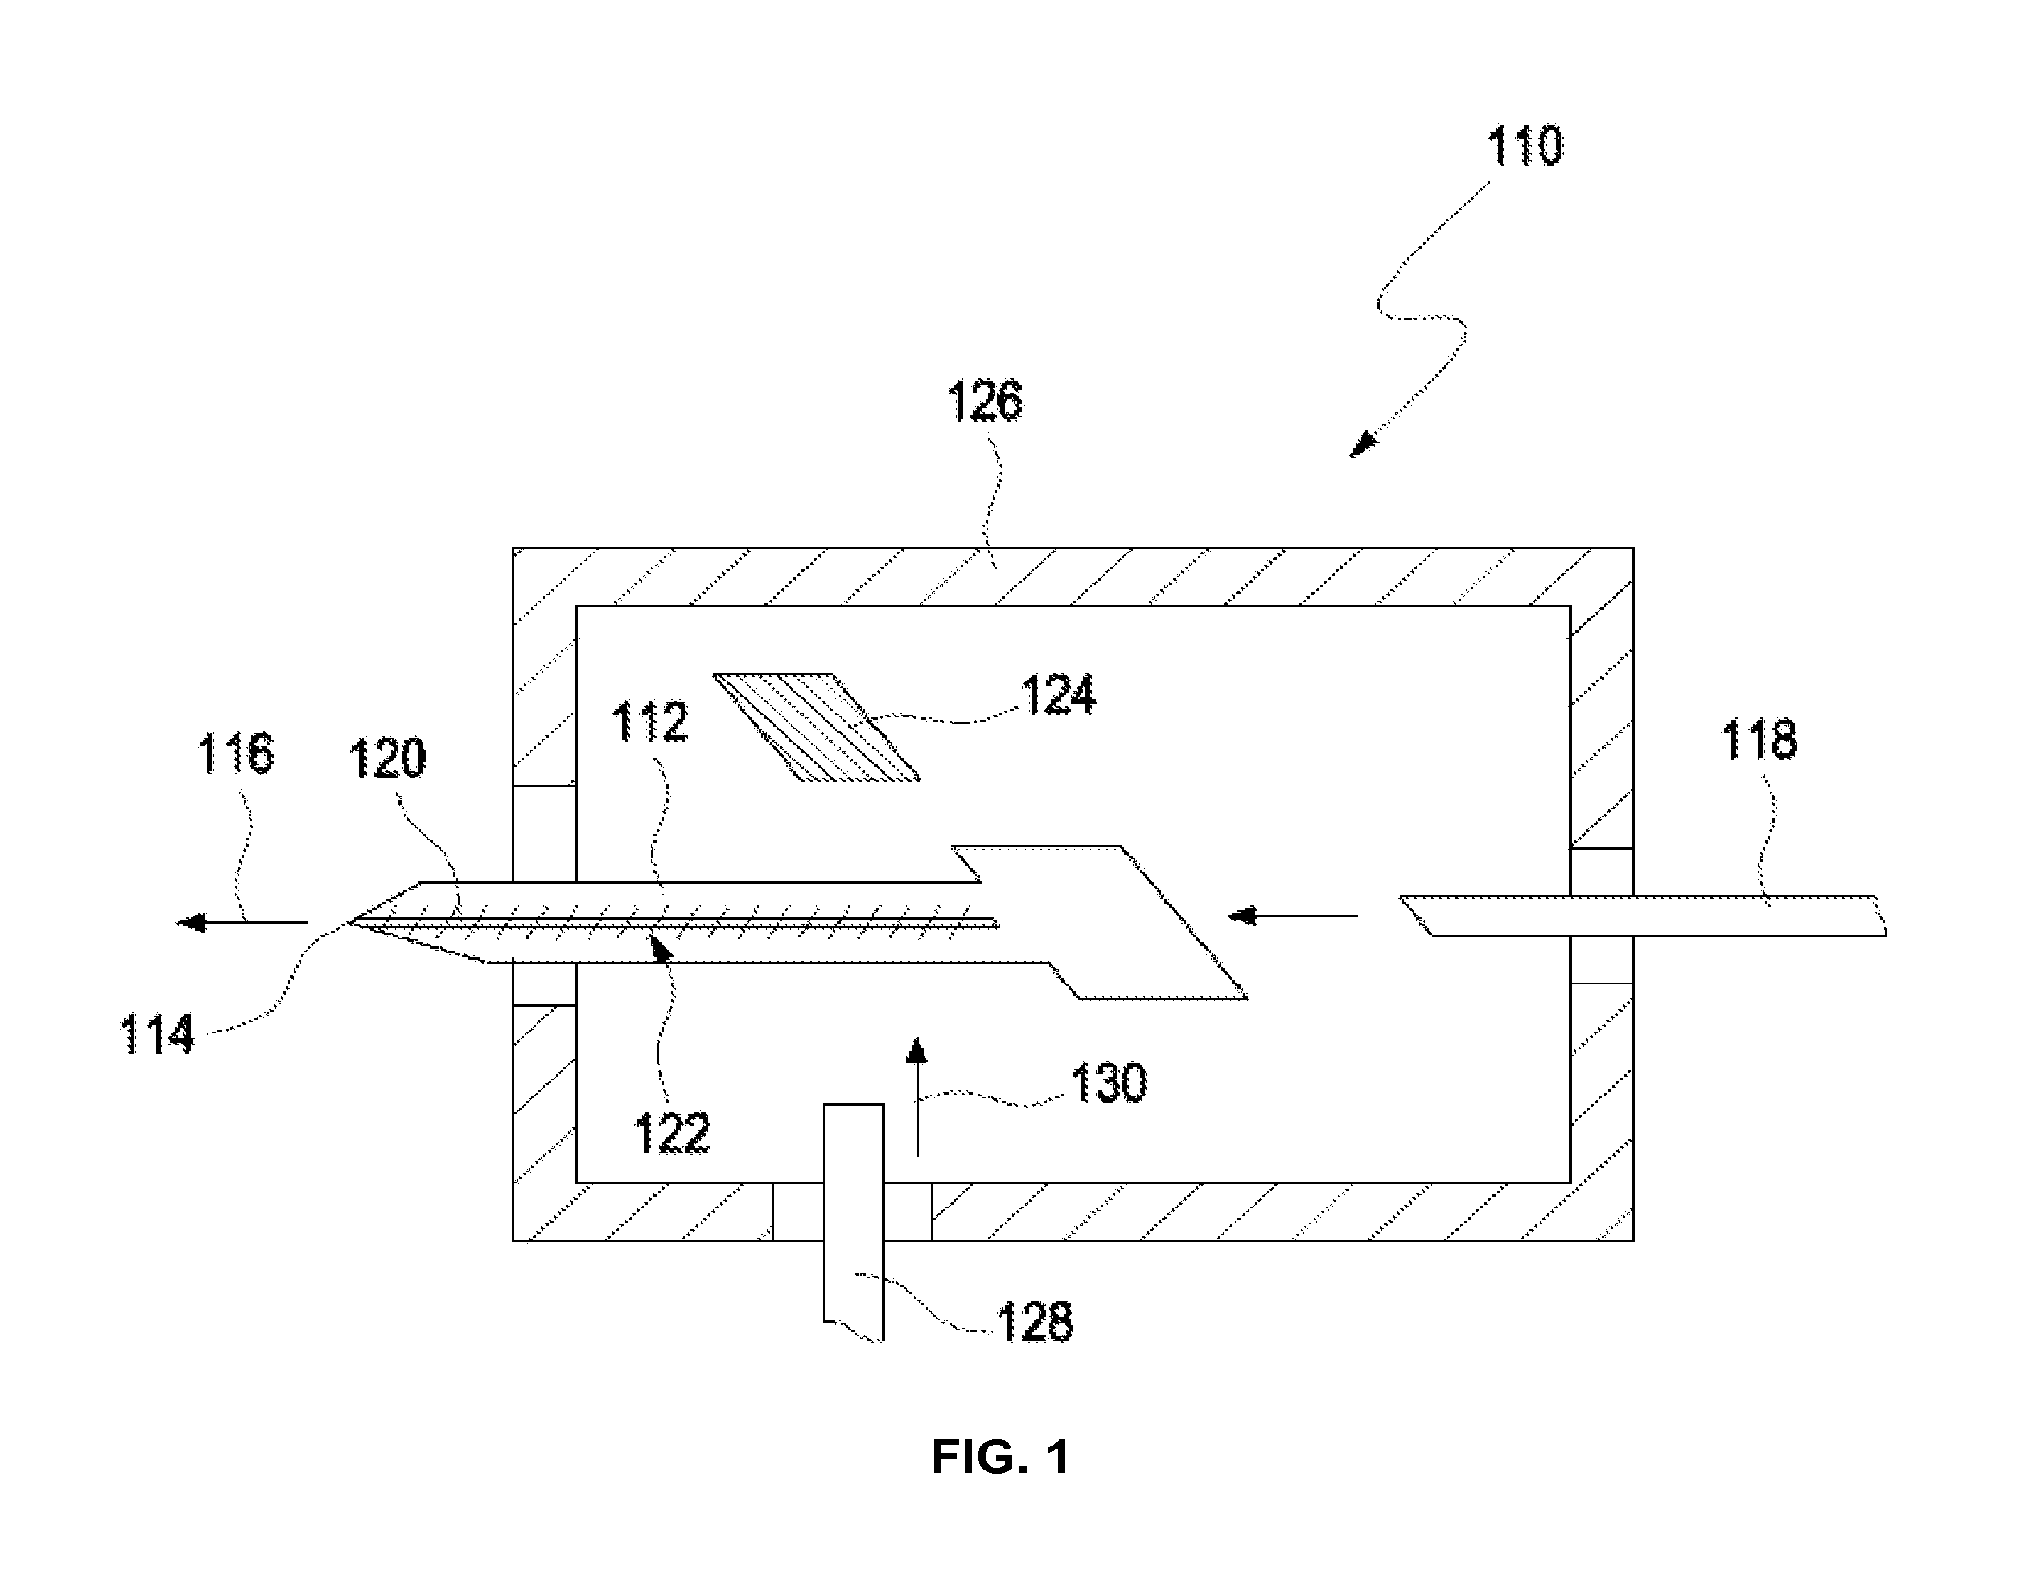 Analytical aids with hydrophilic coating containing nanoparticles with silica structure and methods of producing and using the same